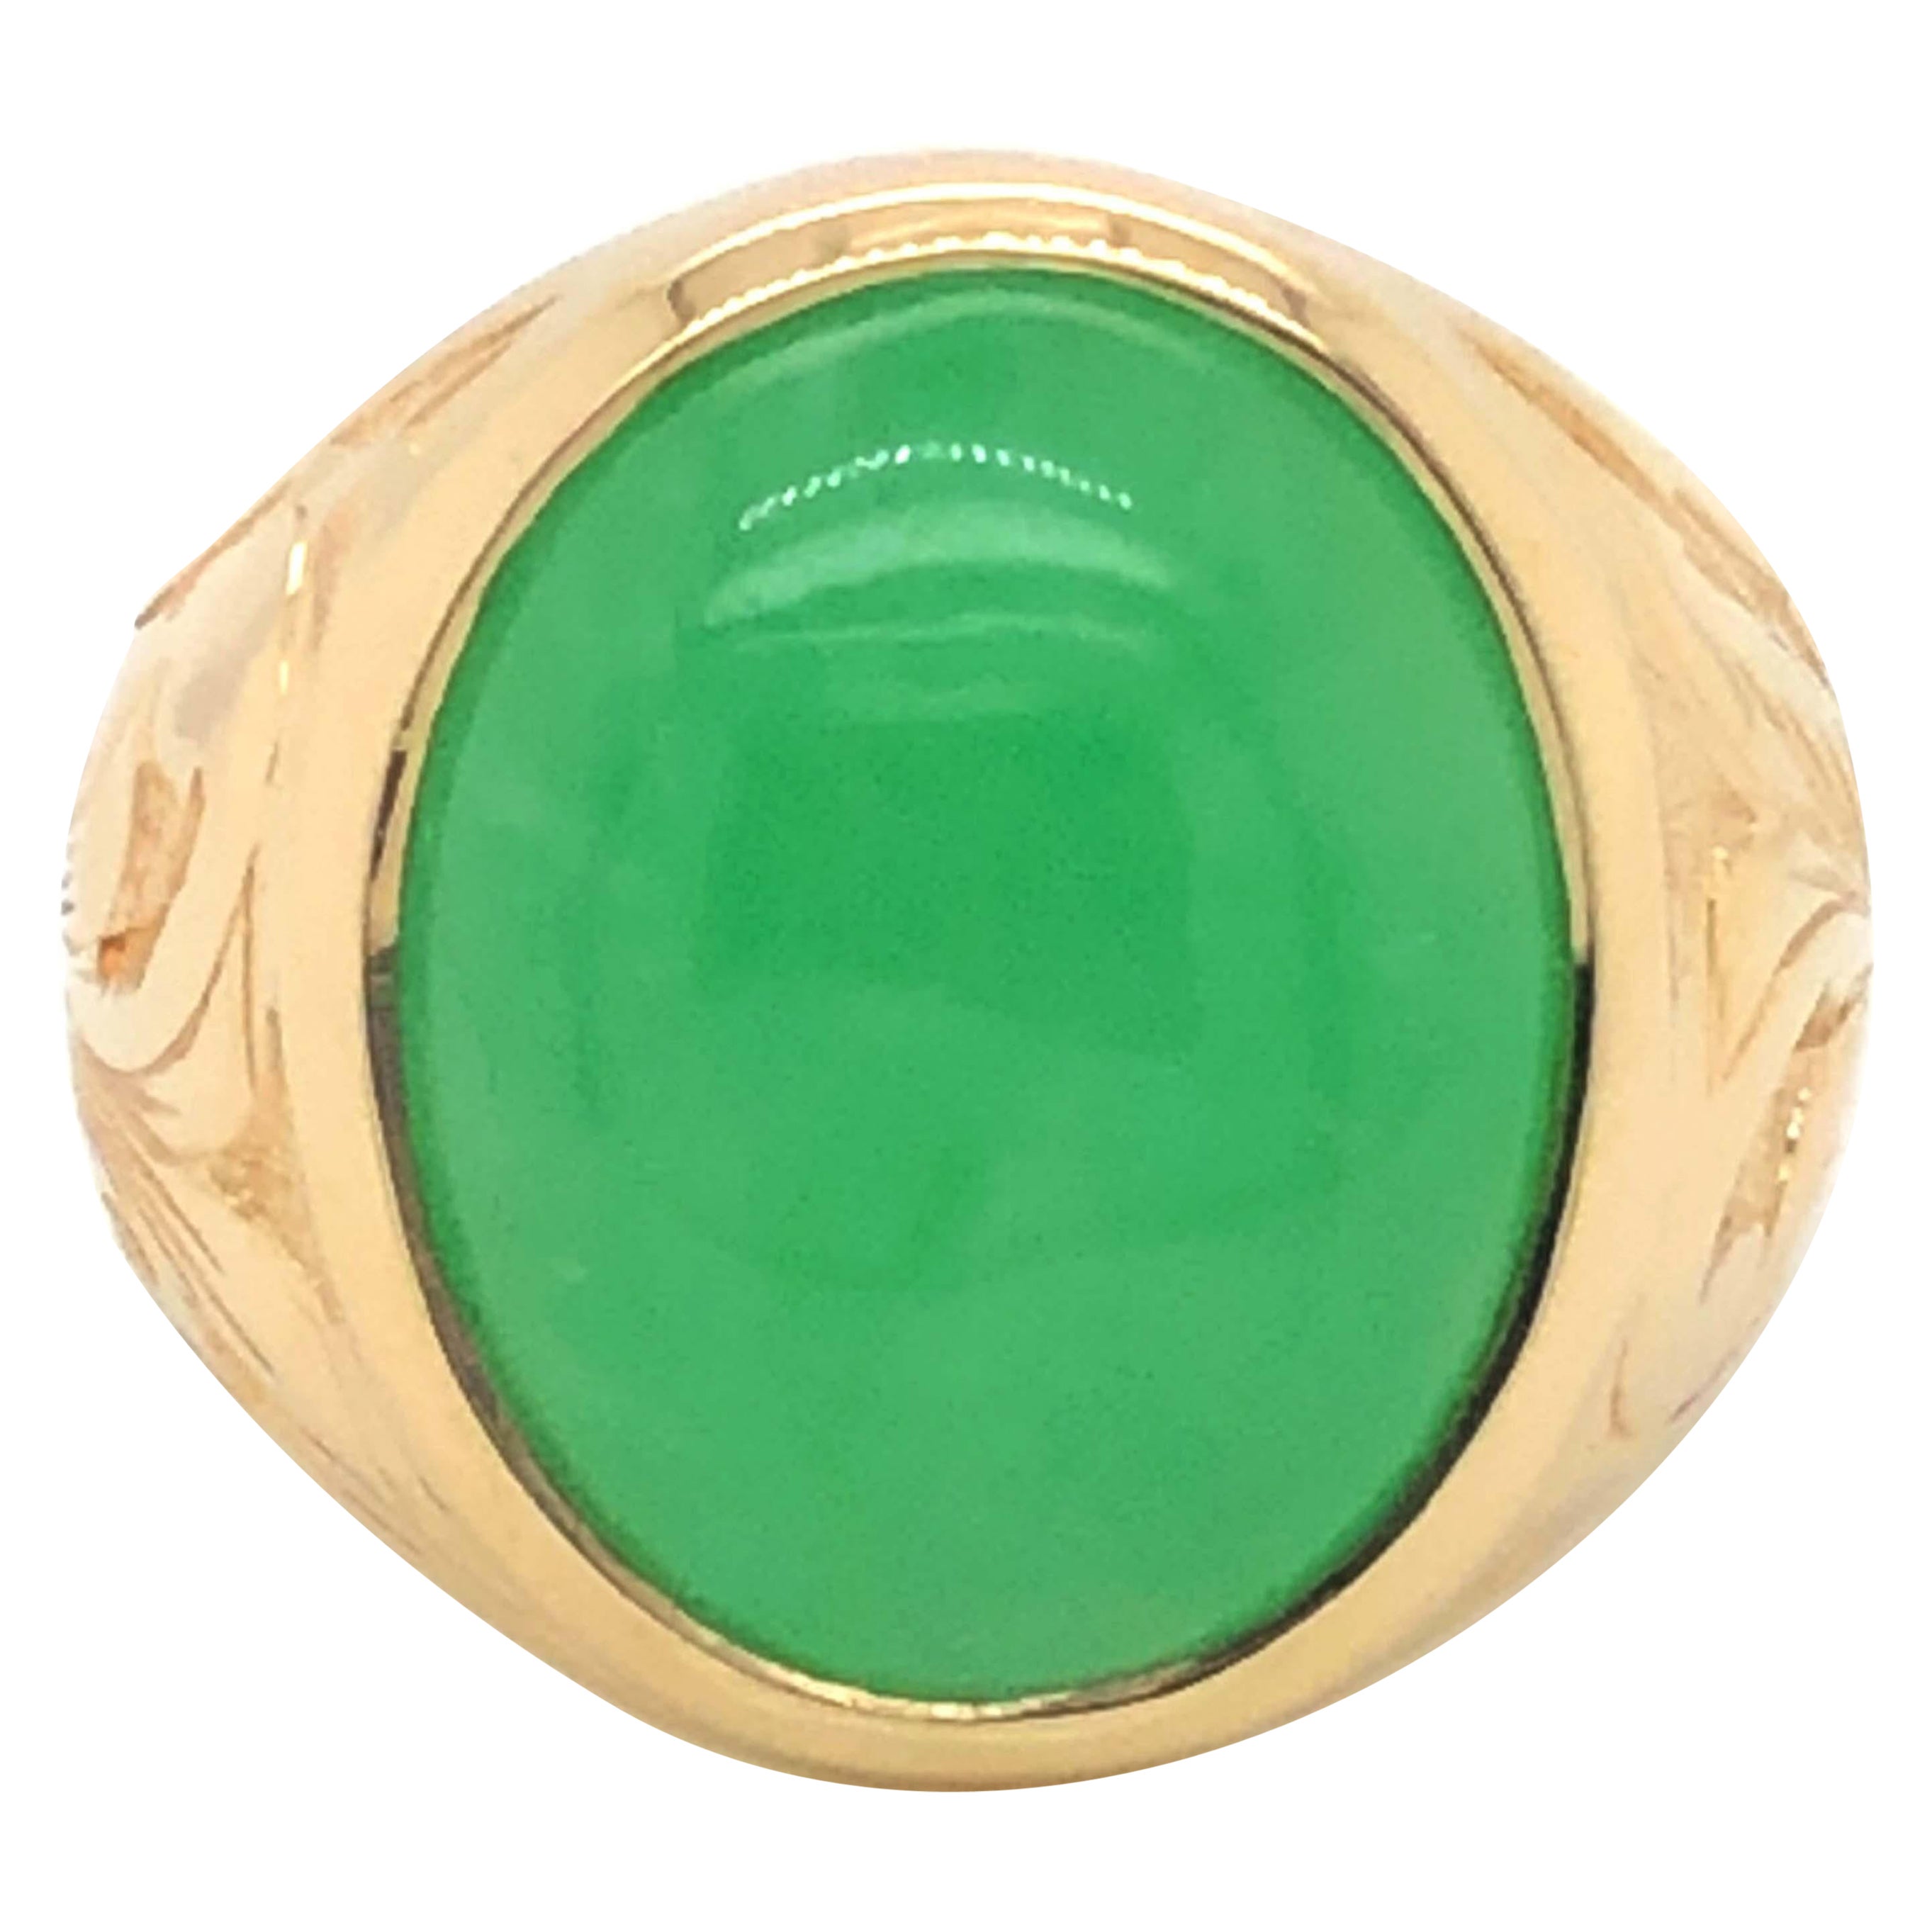 Vintage Oval Green Jade Ring with Engraved Shoulders in 14k Yellow Gold